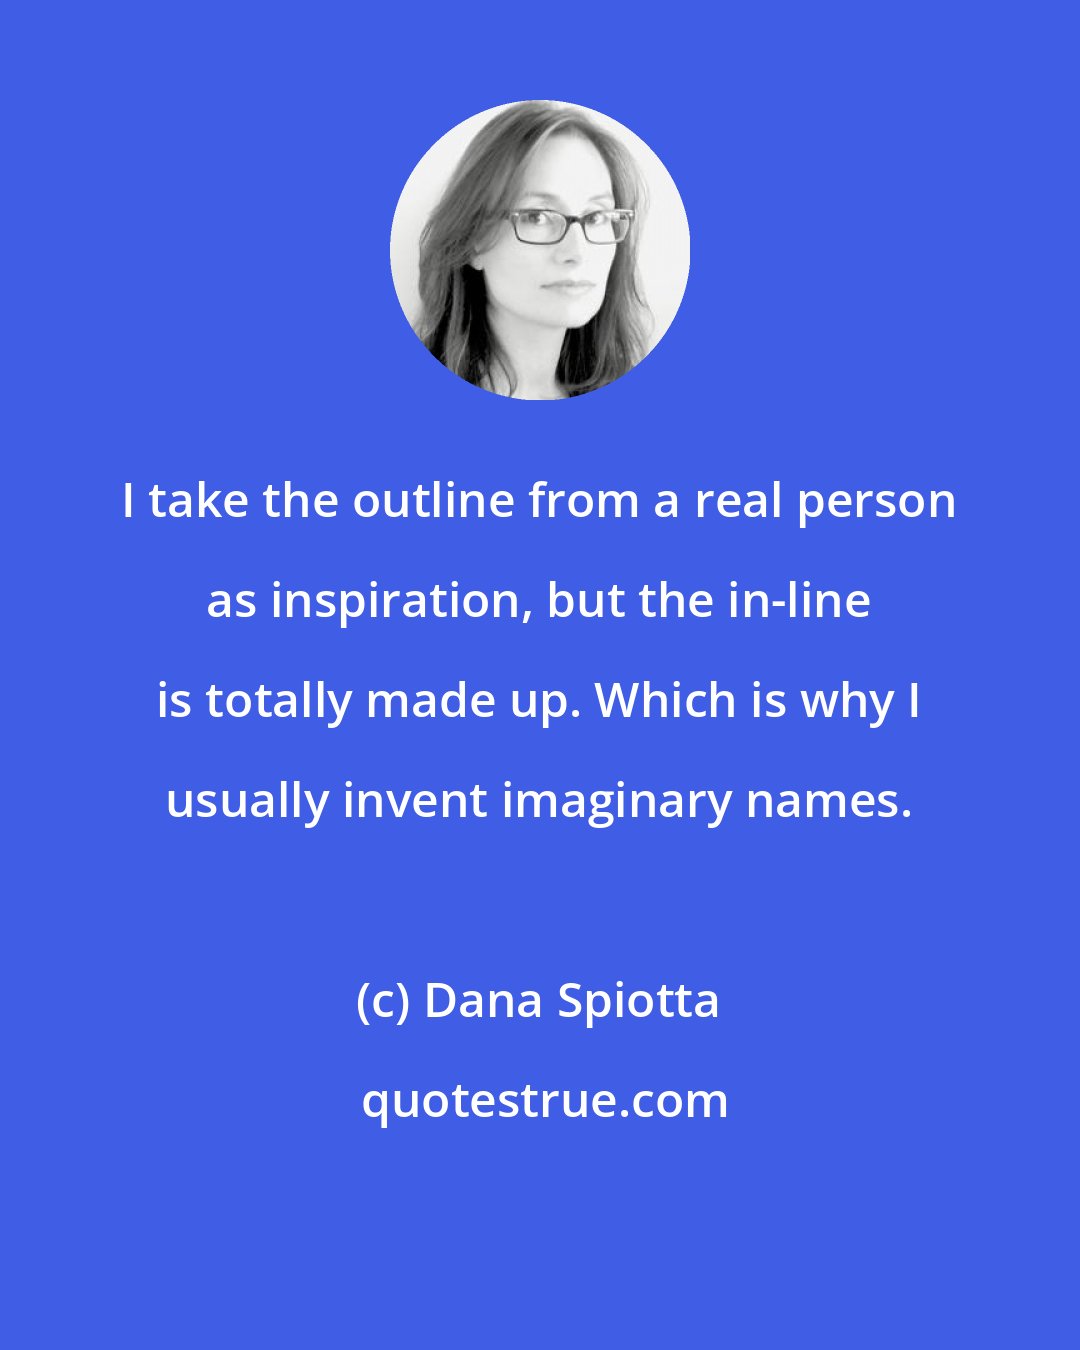 Dana Spiotta: I take the outline from a real person as inspiration, but the in-line is totally made up. Which is why I usually invent imaginary names.